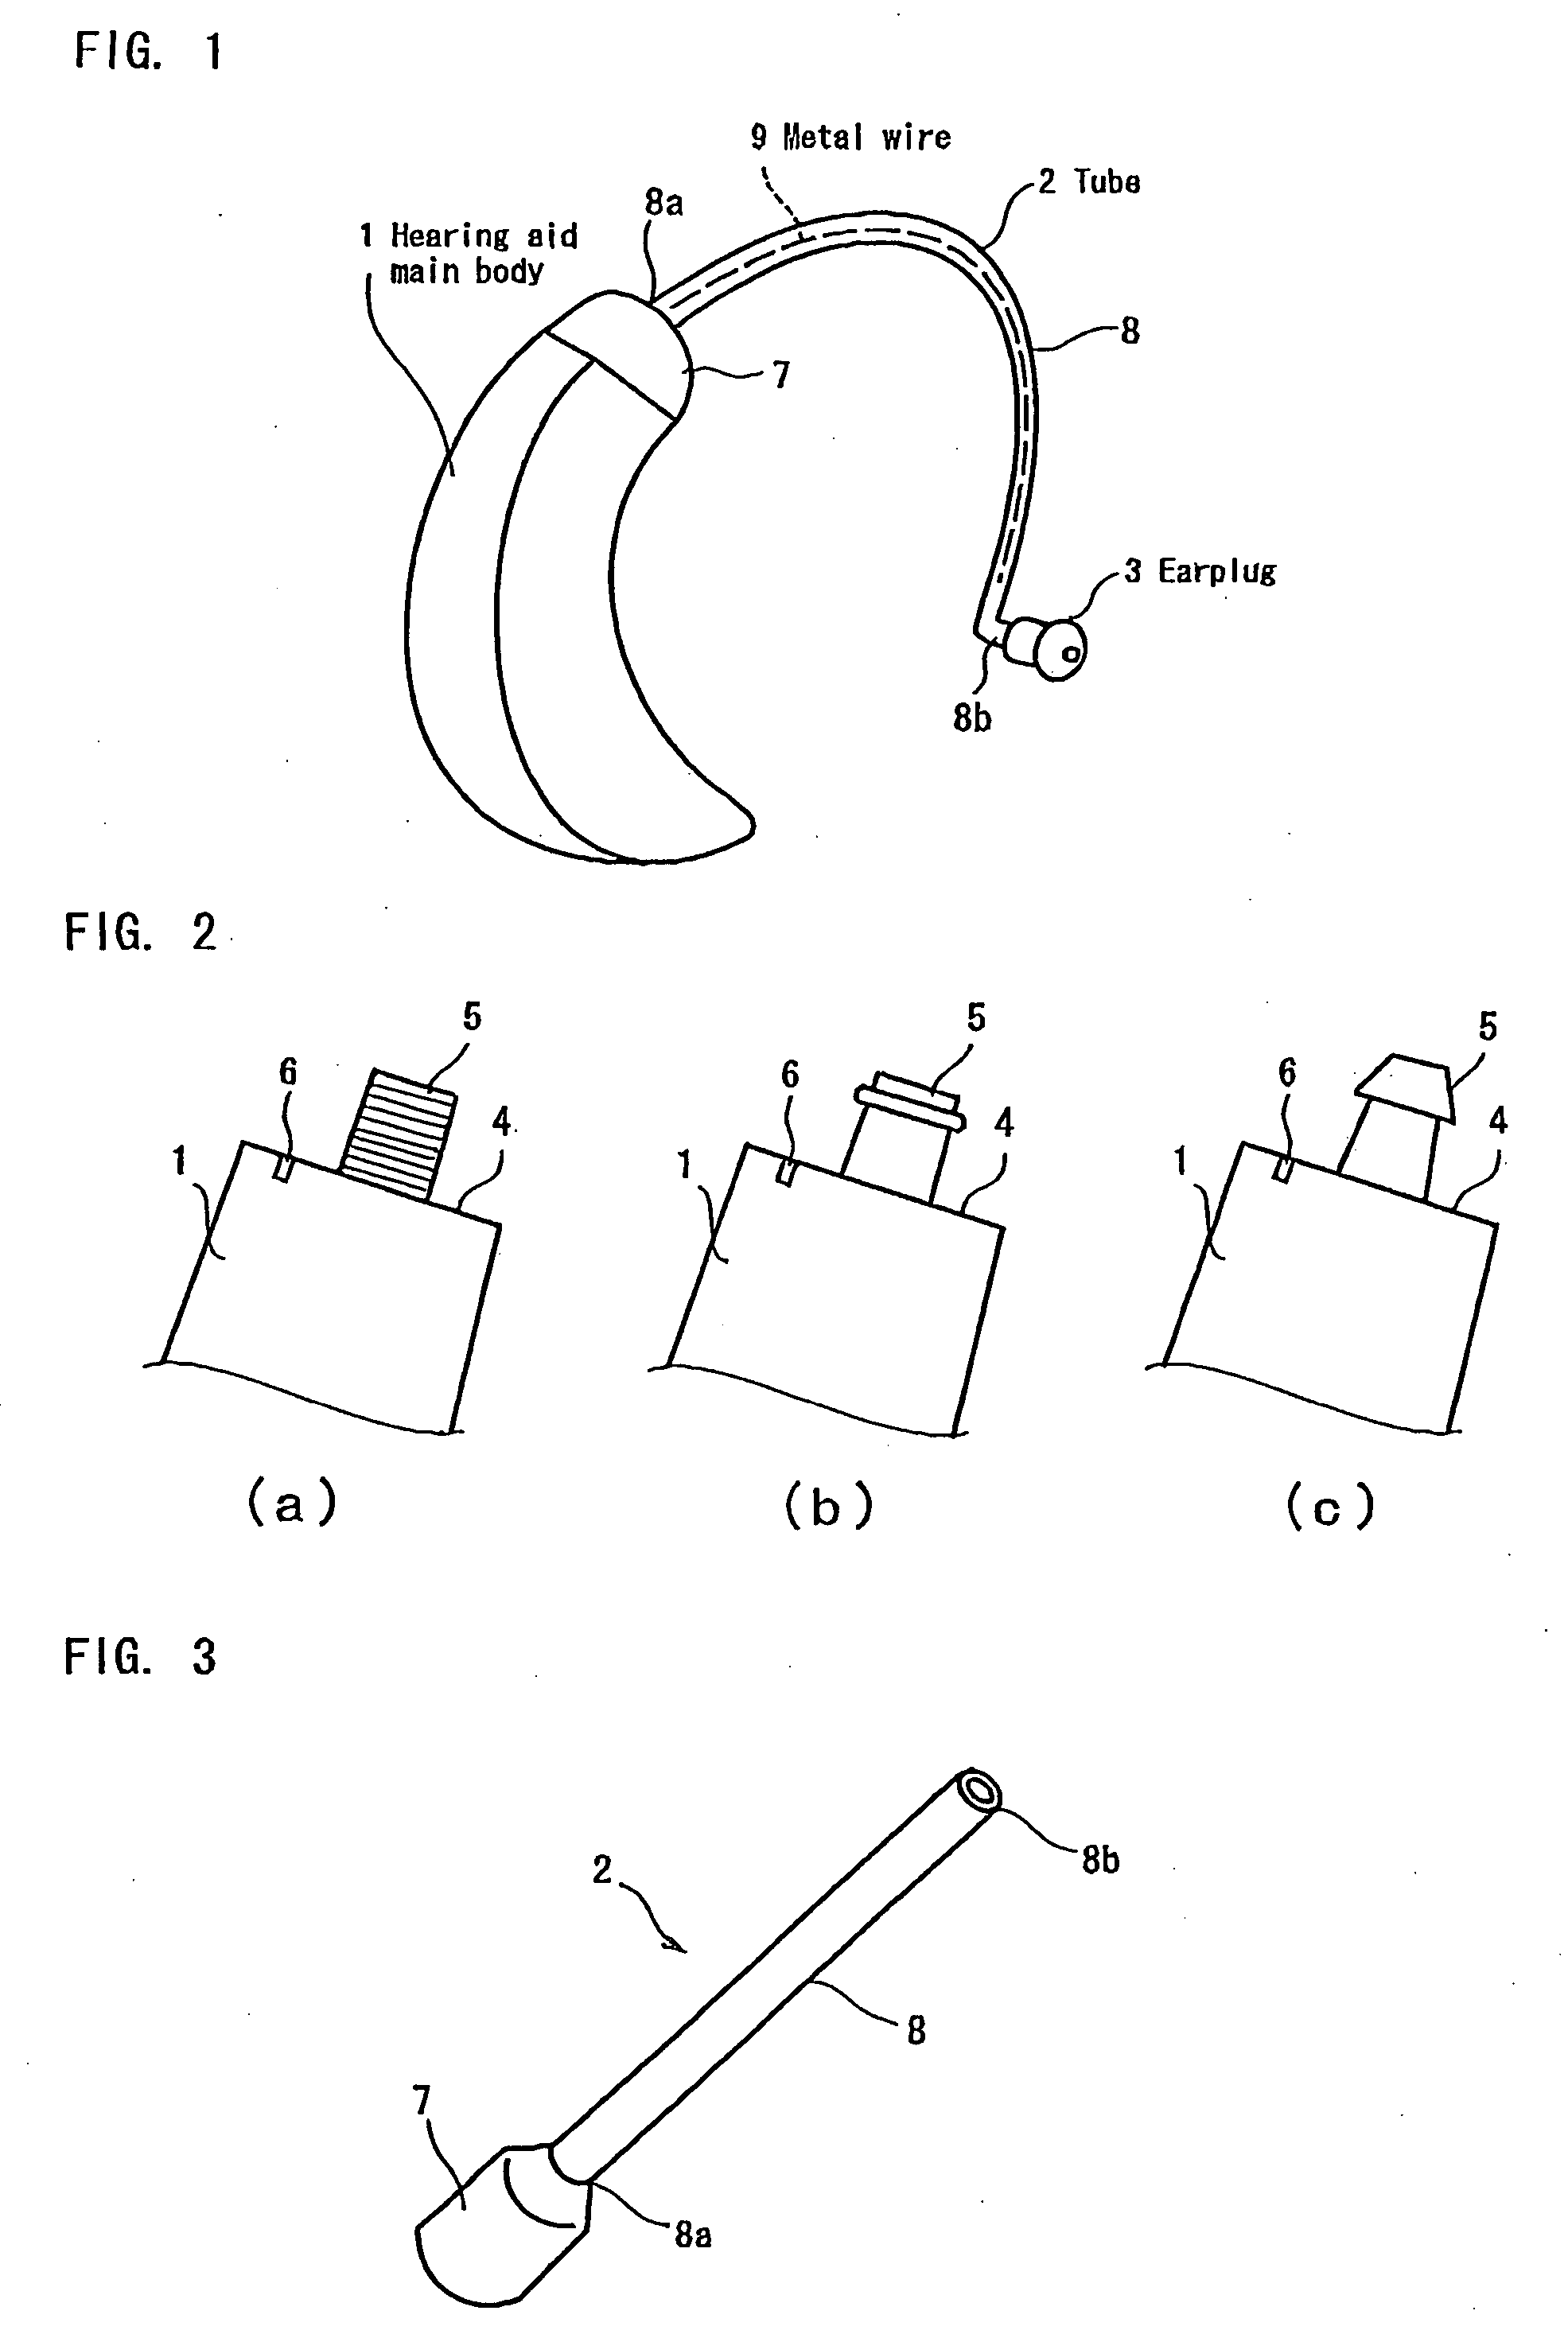 Behind-the-ear type hearing aid